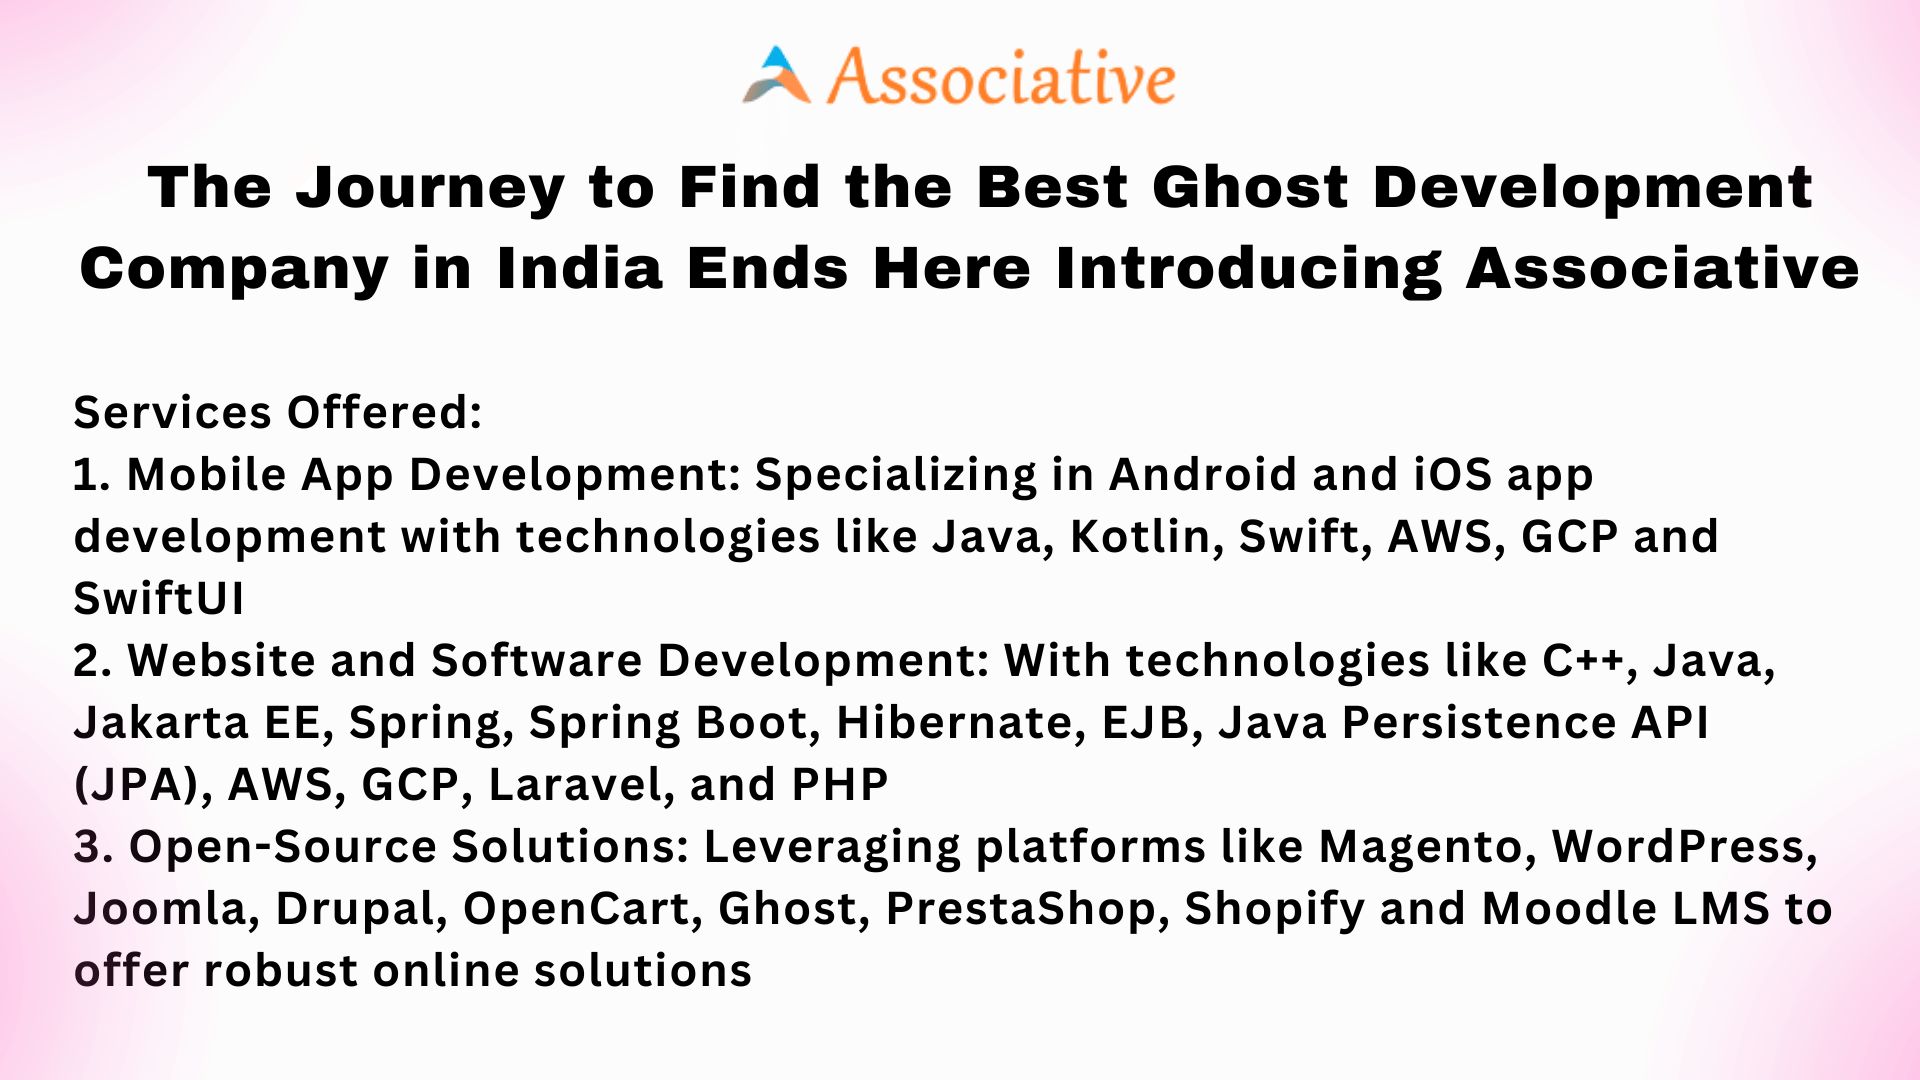 The Journey to Find the Best Ghost Development Company in India Ends Here Introducing Associative